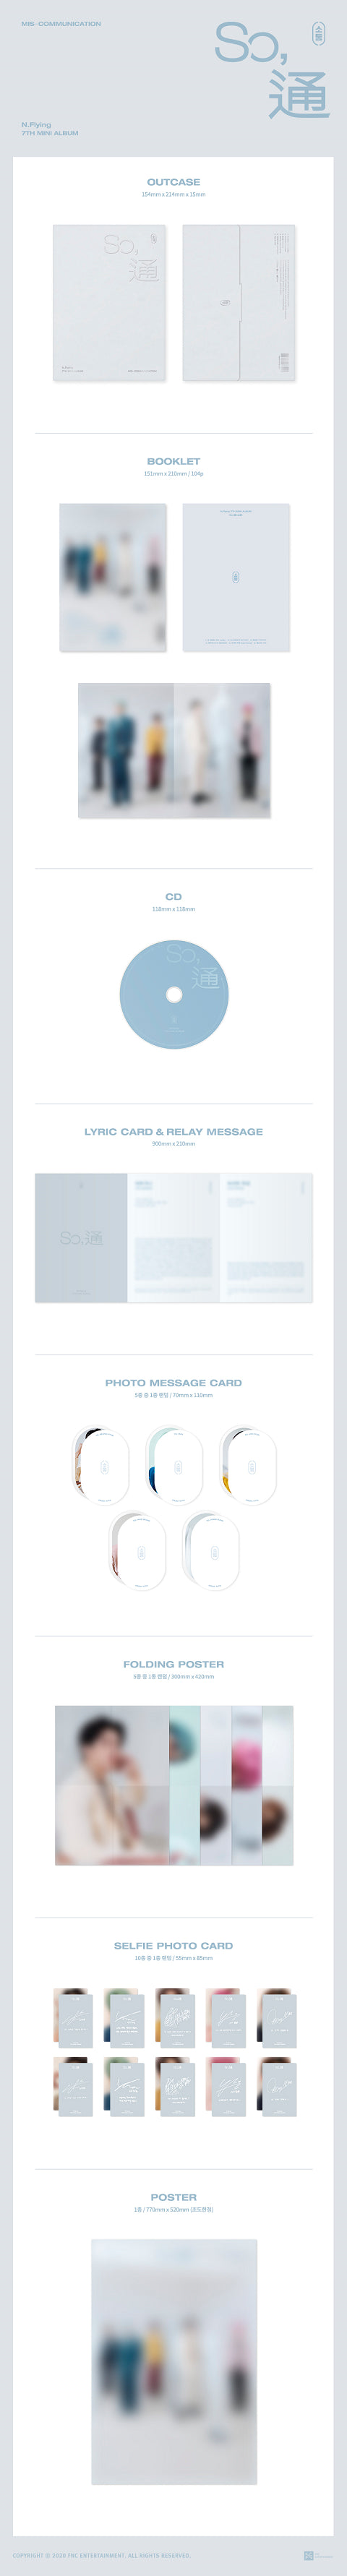 1 CD
1 Poster On Pack
1 Booklet (104 pages)
1 Lyric Card&relay
1 Photo Message Card
1 Selfie Photo Card